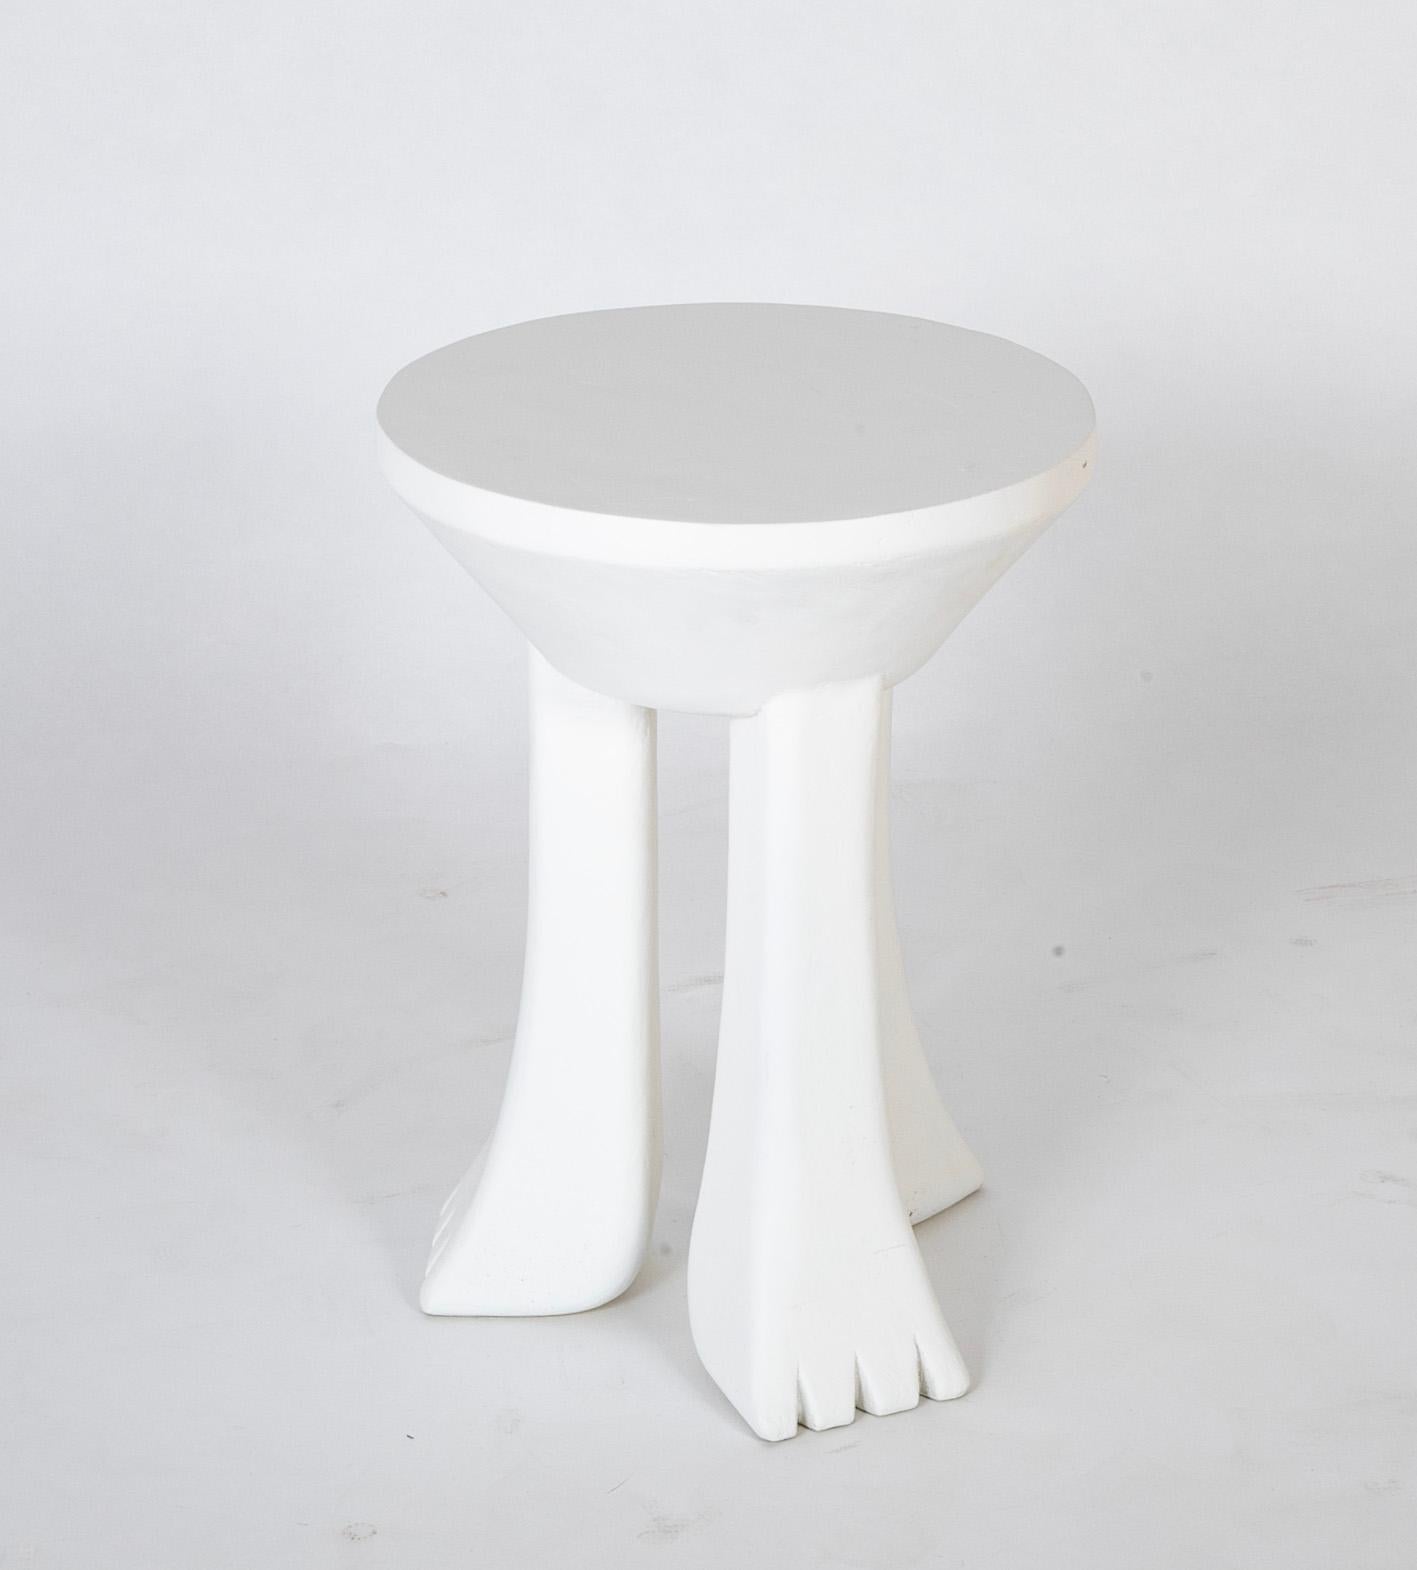 Plastered Fiberglass 3 Legged Table in the Style of John Dickinson ( 1920 - 1982 ).  USA.  Mid 20th century.  Two available at $4,900 EACH.